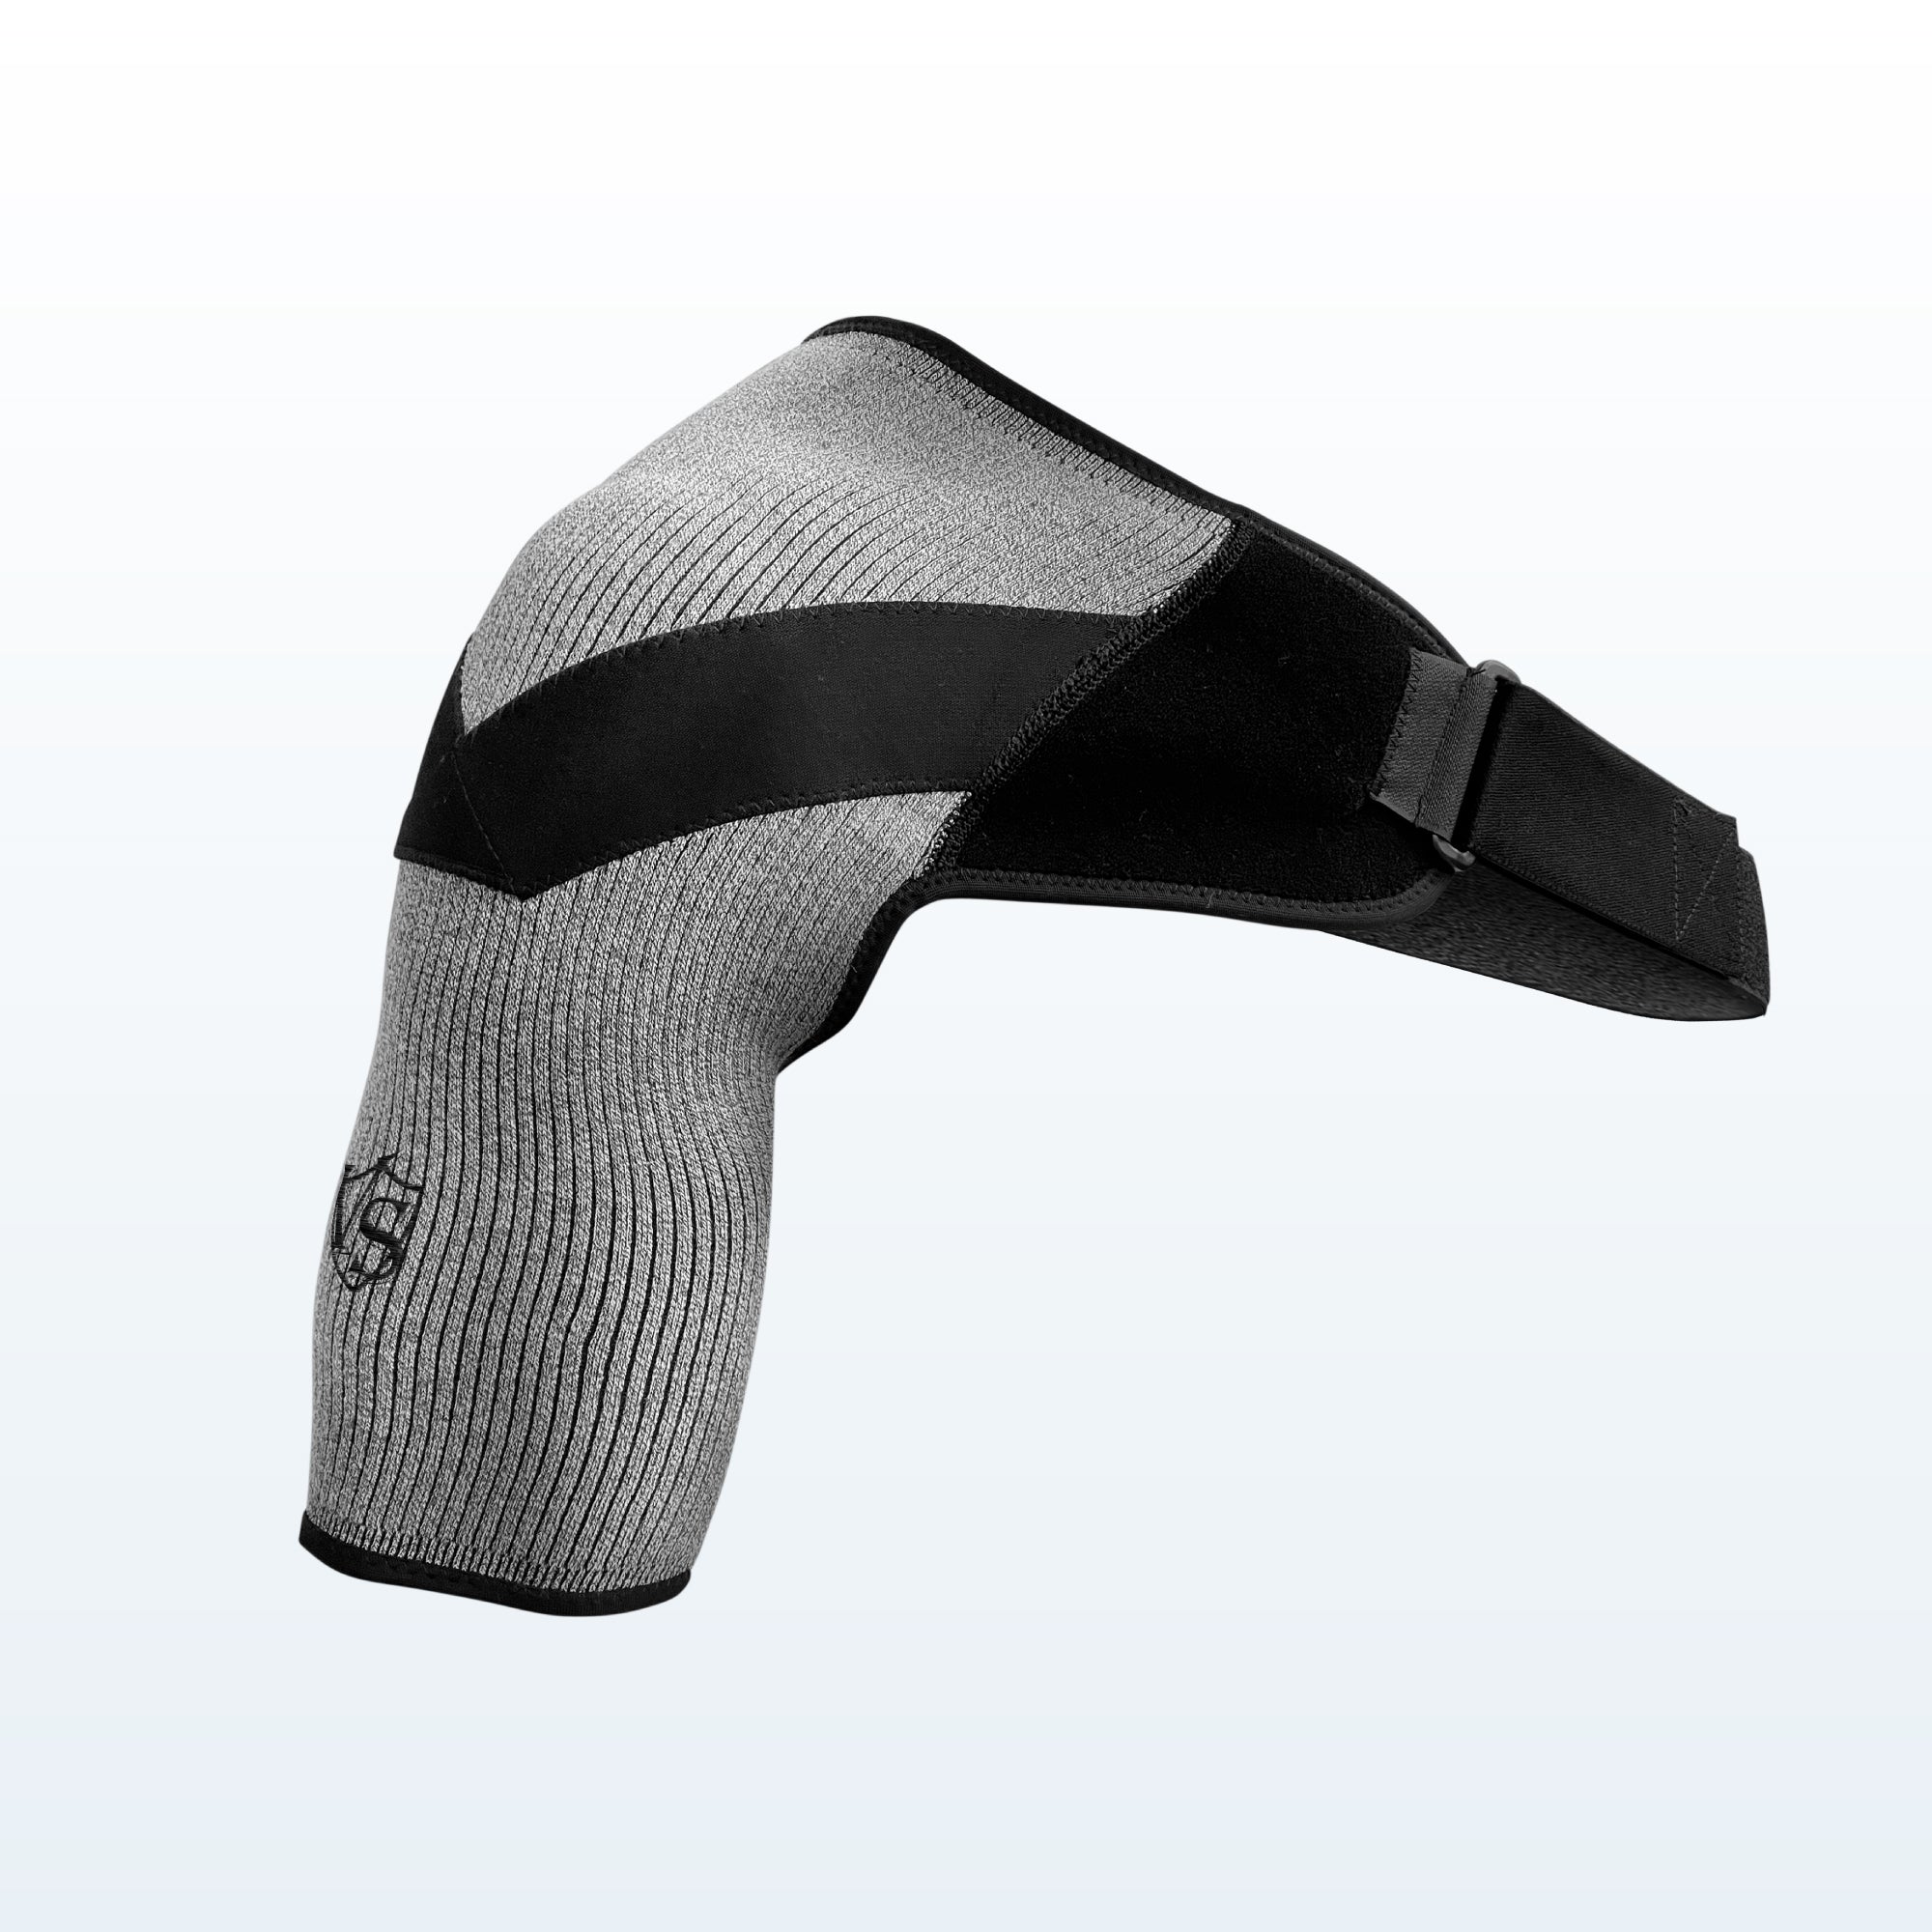 Compression Recovery Shoulder Brace